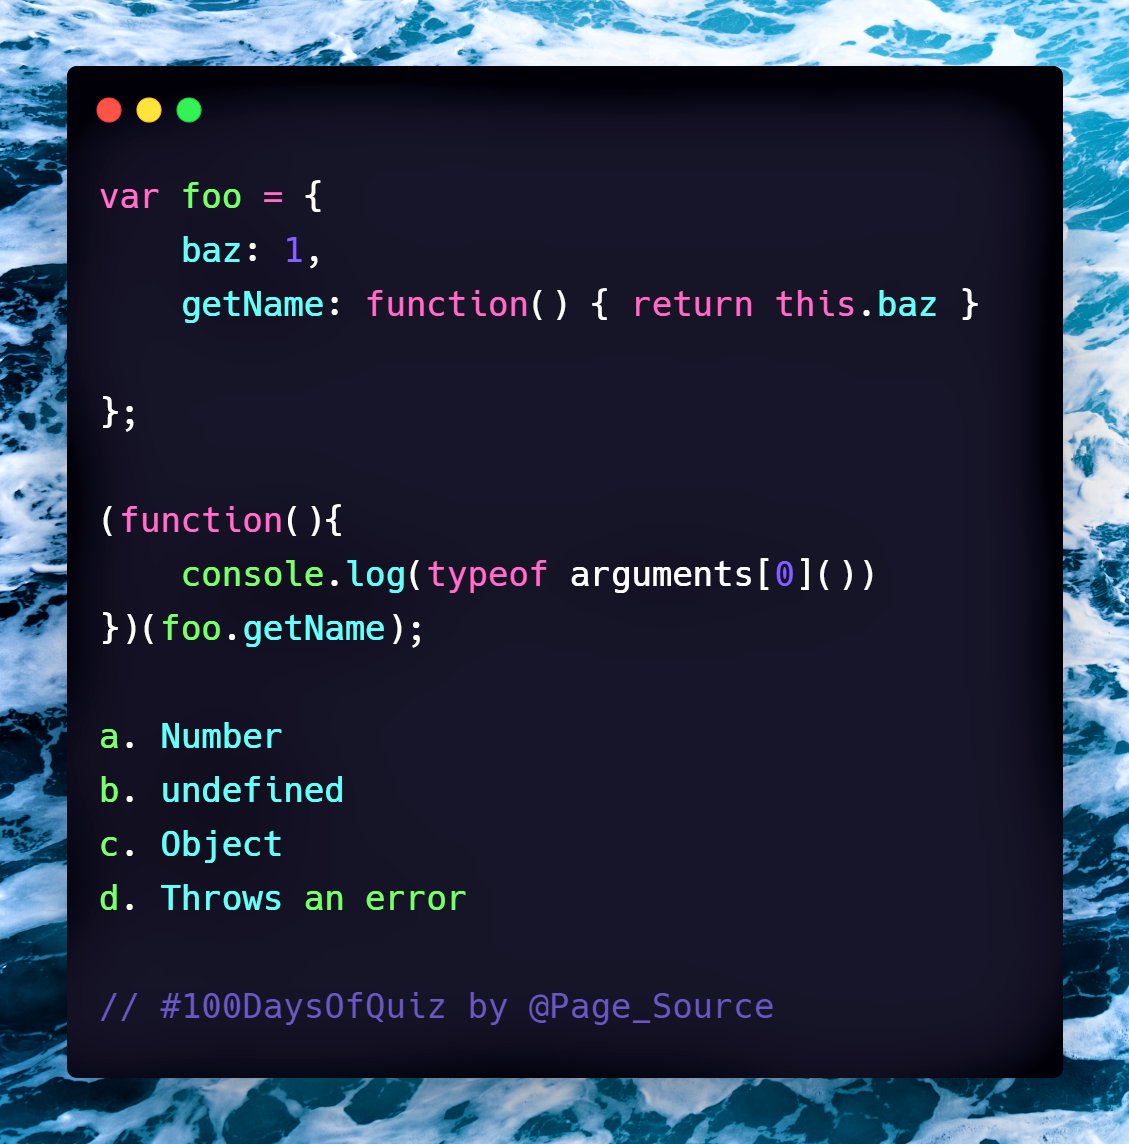  Day 30 Question in  #JavaScript 100 Days Of Quiz What is logged in the console for this code?  Follow this thread for all questions  #100DaysOfCode  #100DaysOfQuiz  #WebDeveloper  #WebDevelopment  #DEVCommunity